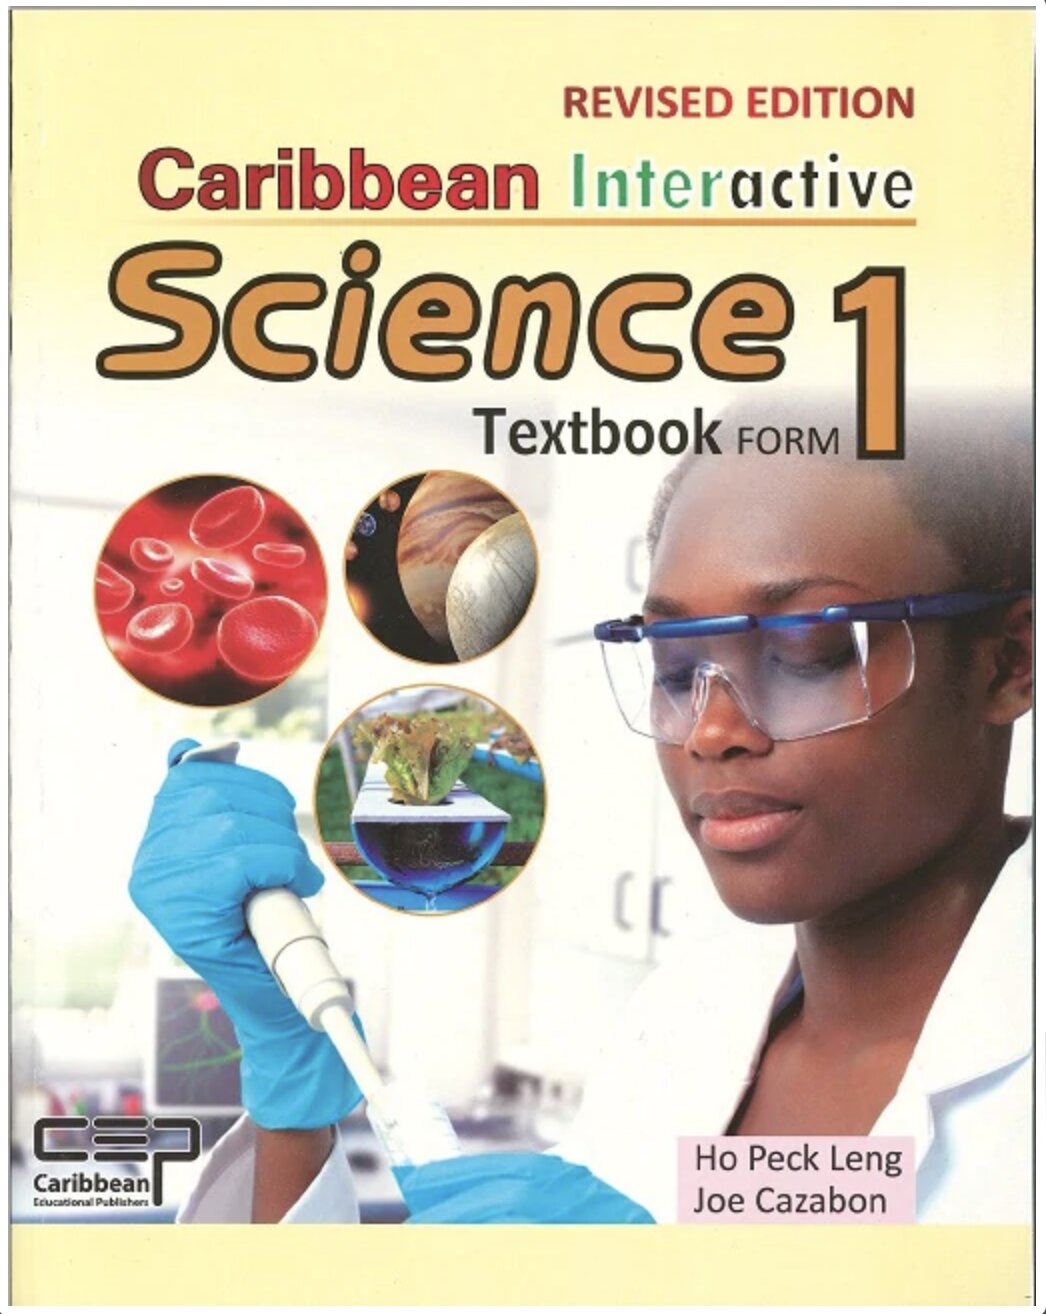 Caribbean Interactive Science Textbook (Form 1)  Scholarly Books